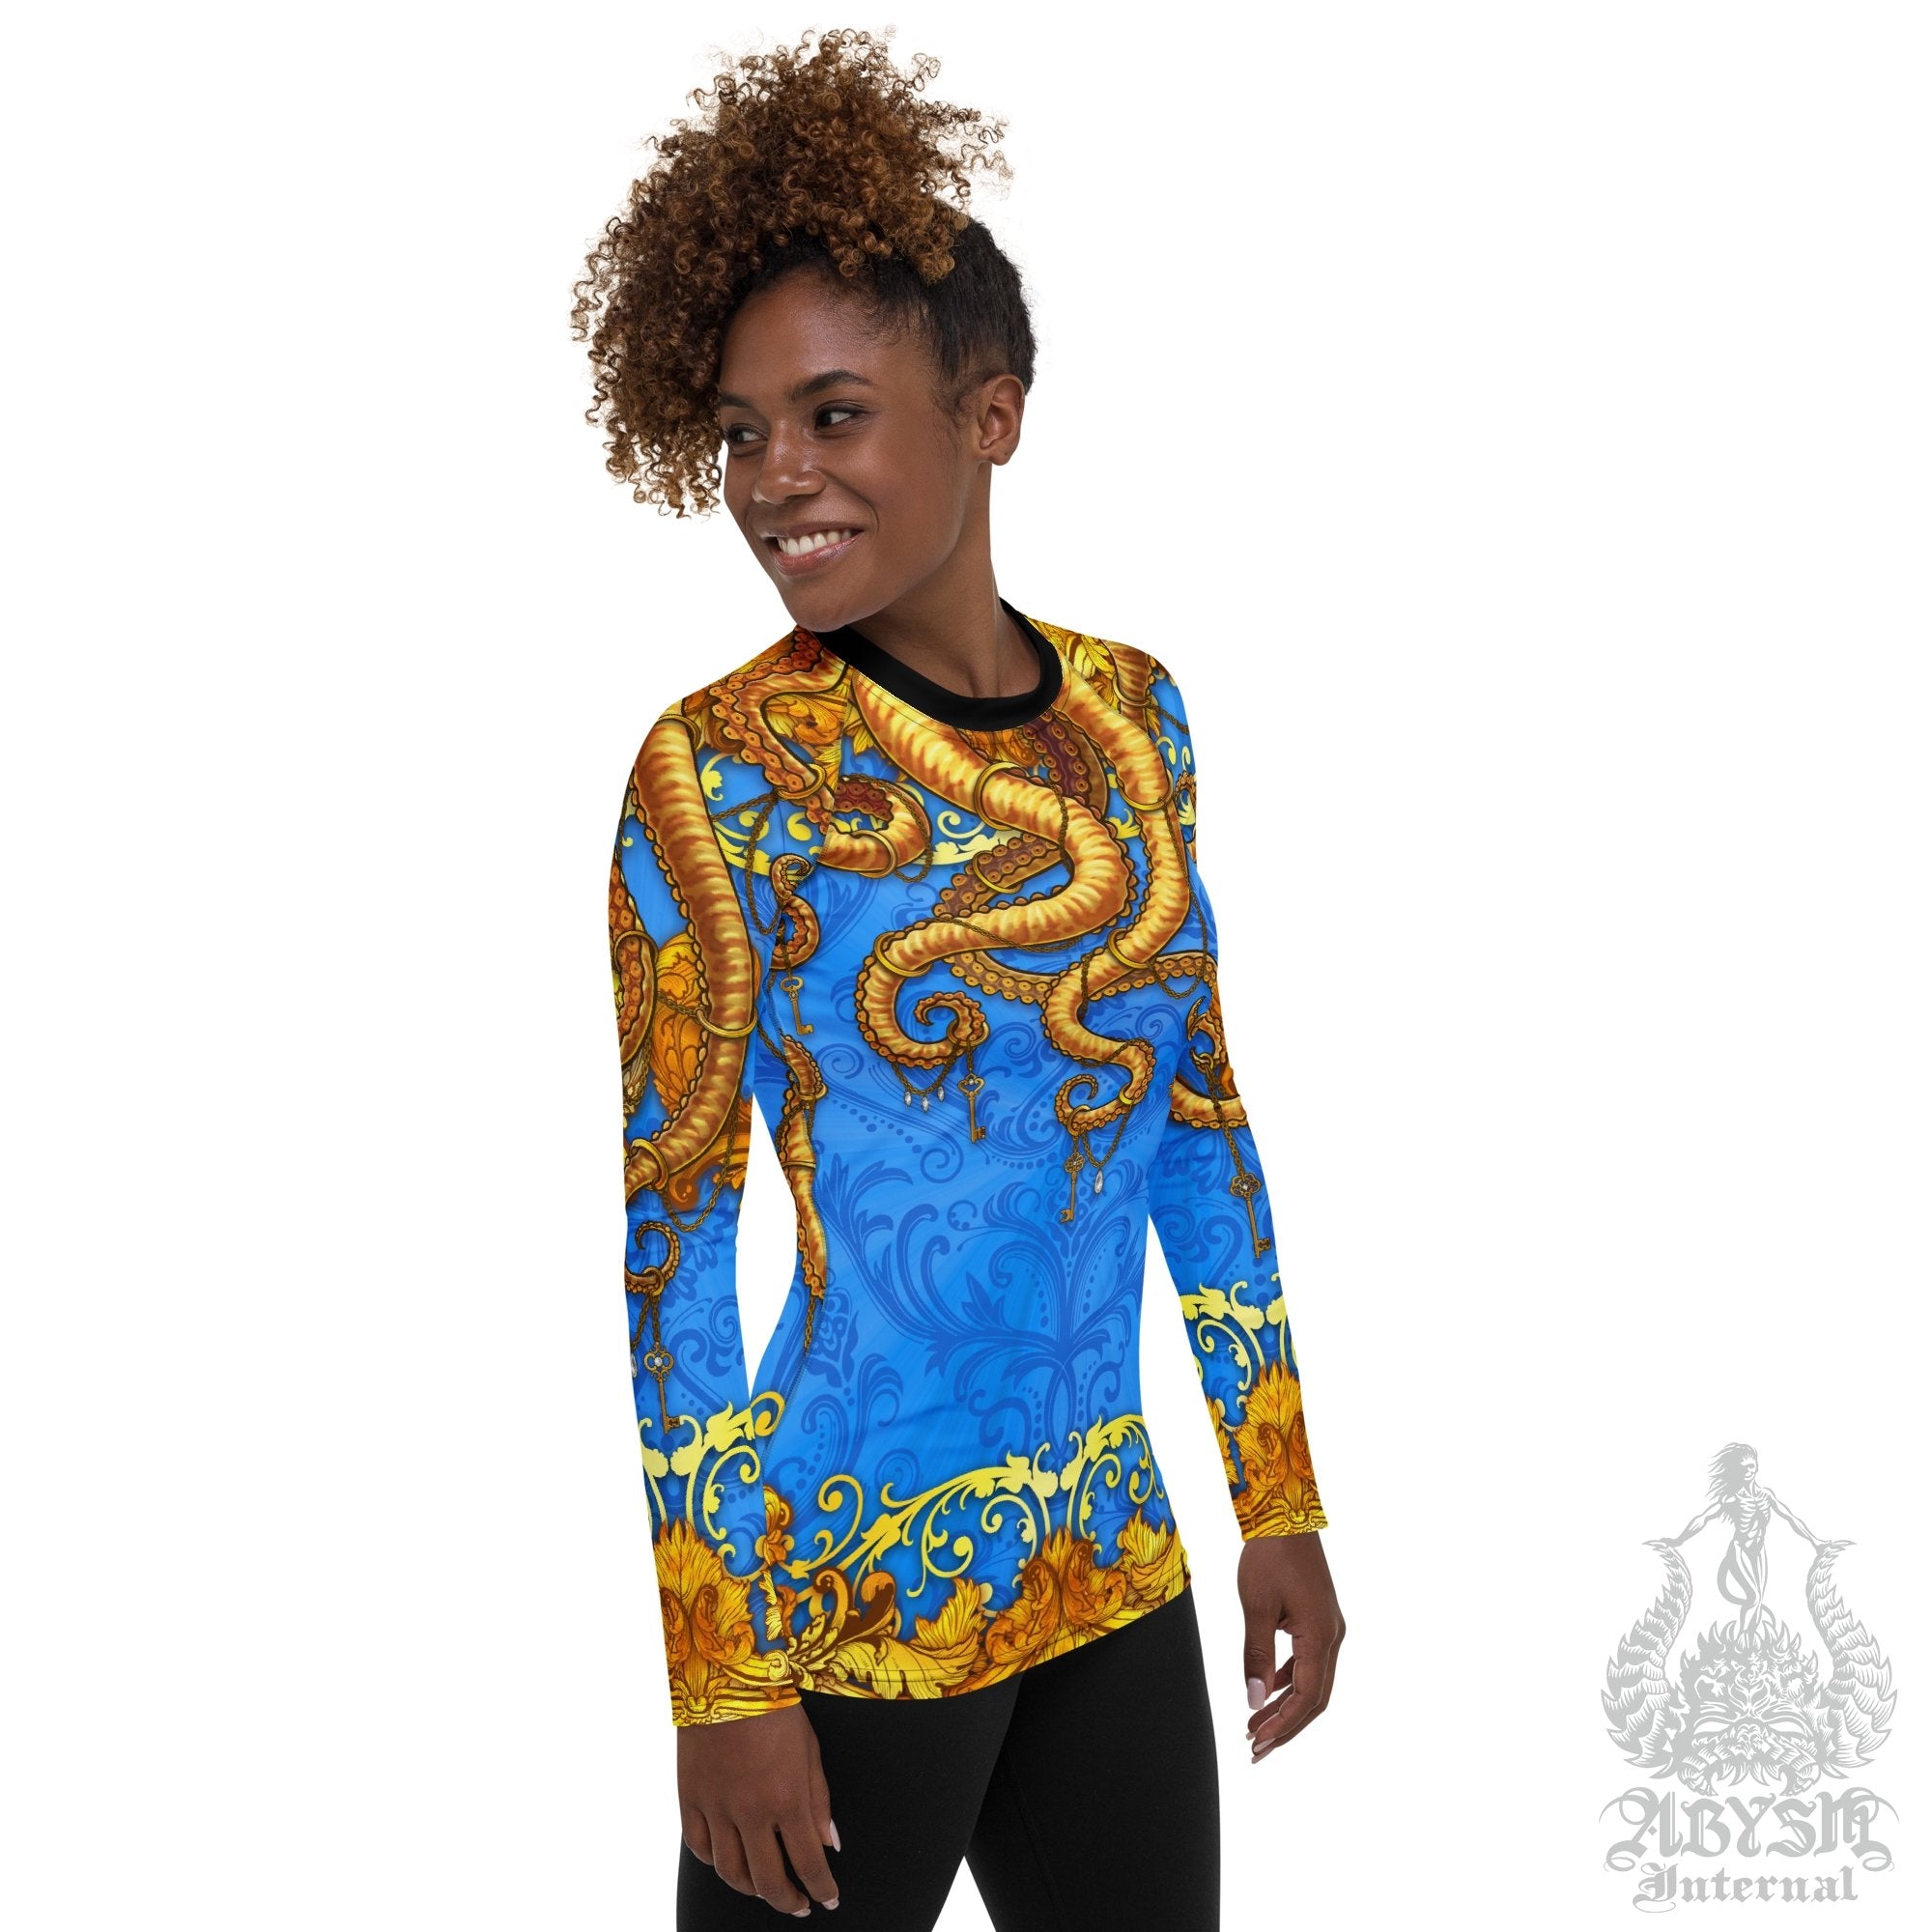 Octopus Rash Guard for Women, Blue and Gold Long Sleeve spandex shirt for surfing, swimsuit top for water sports, Fantasy Art - Cyan - Abysm Internal